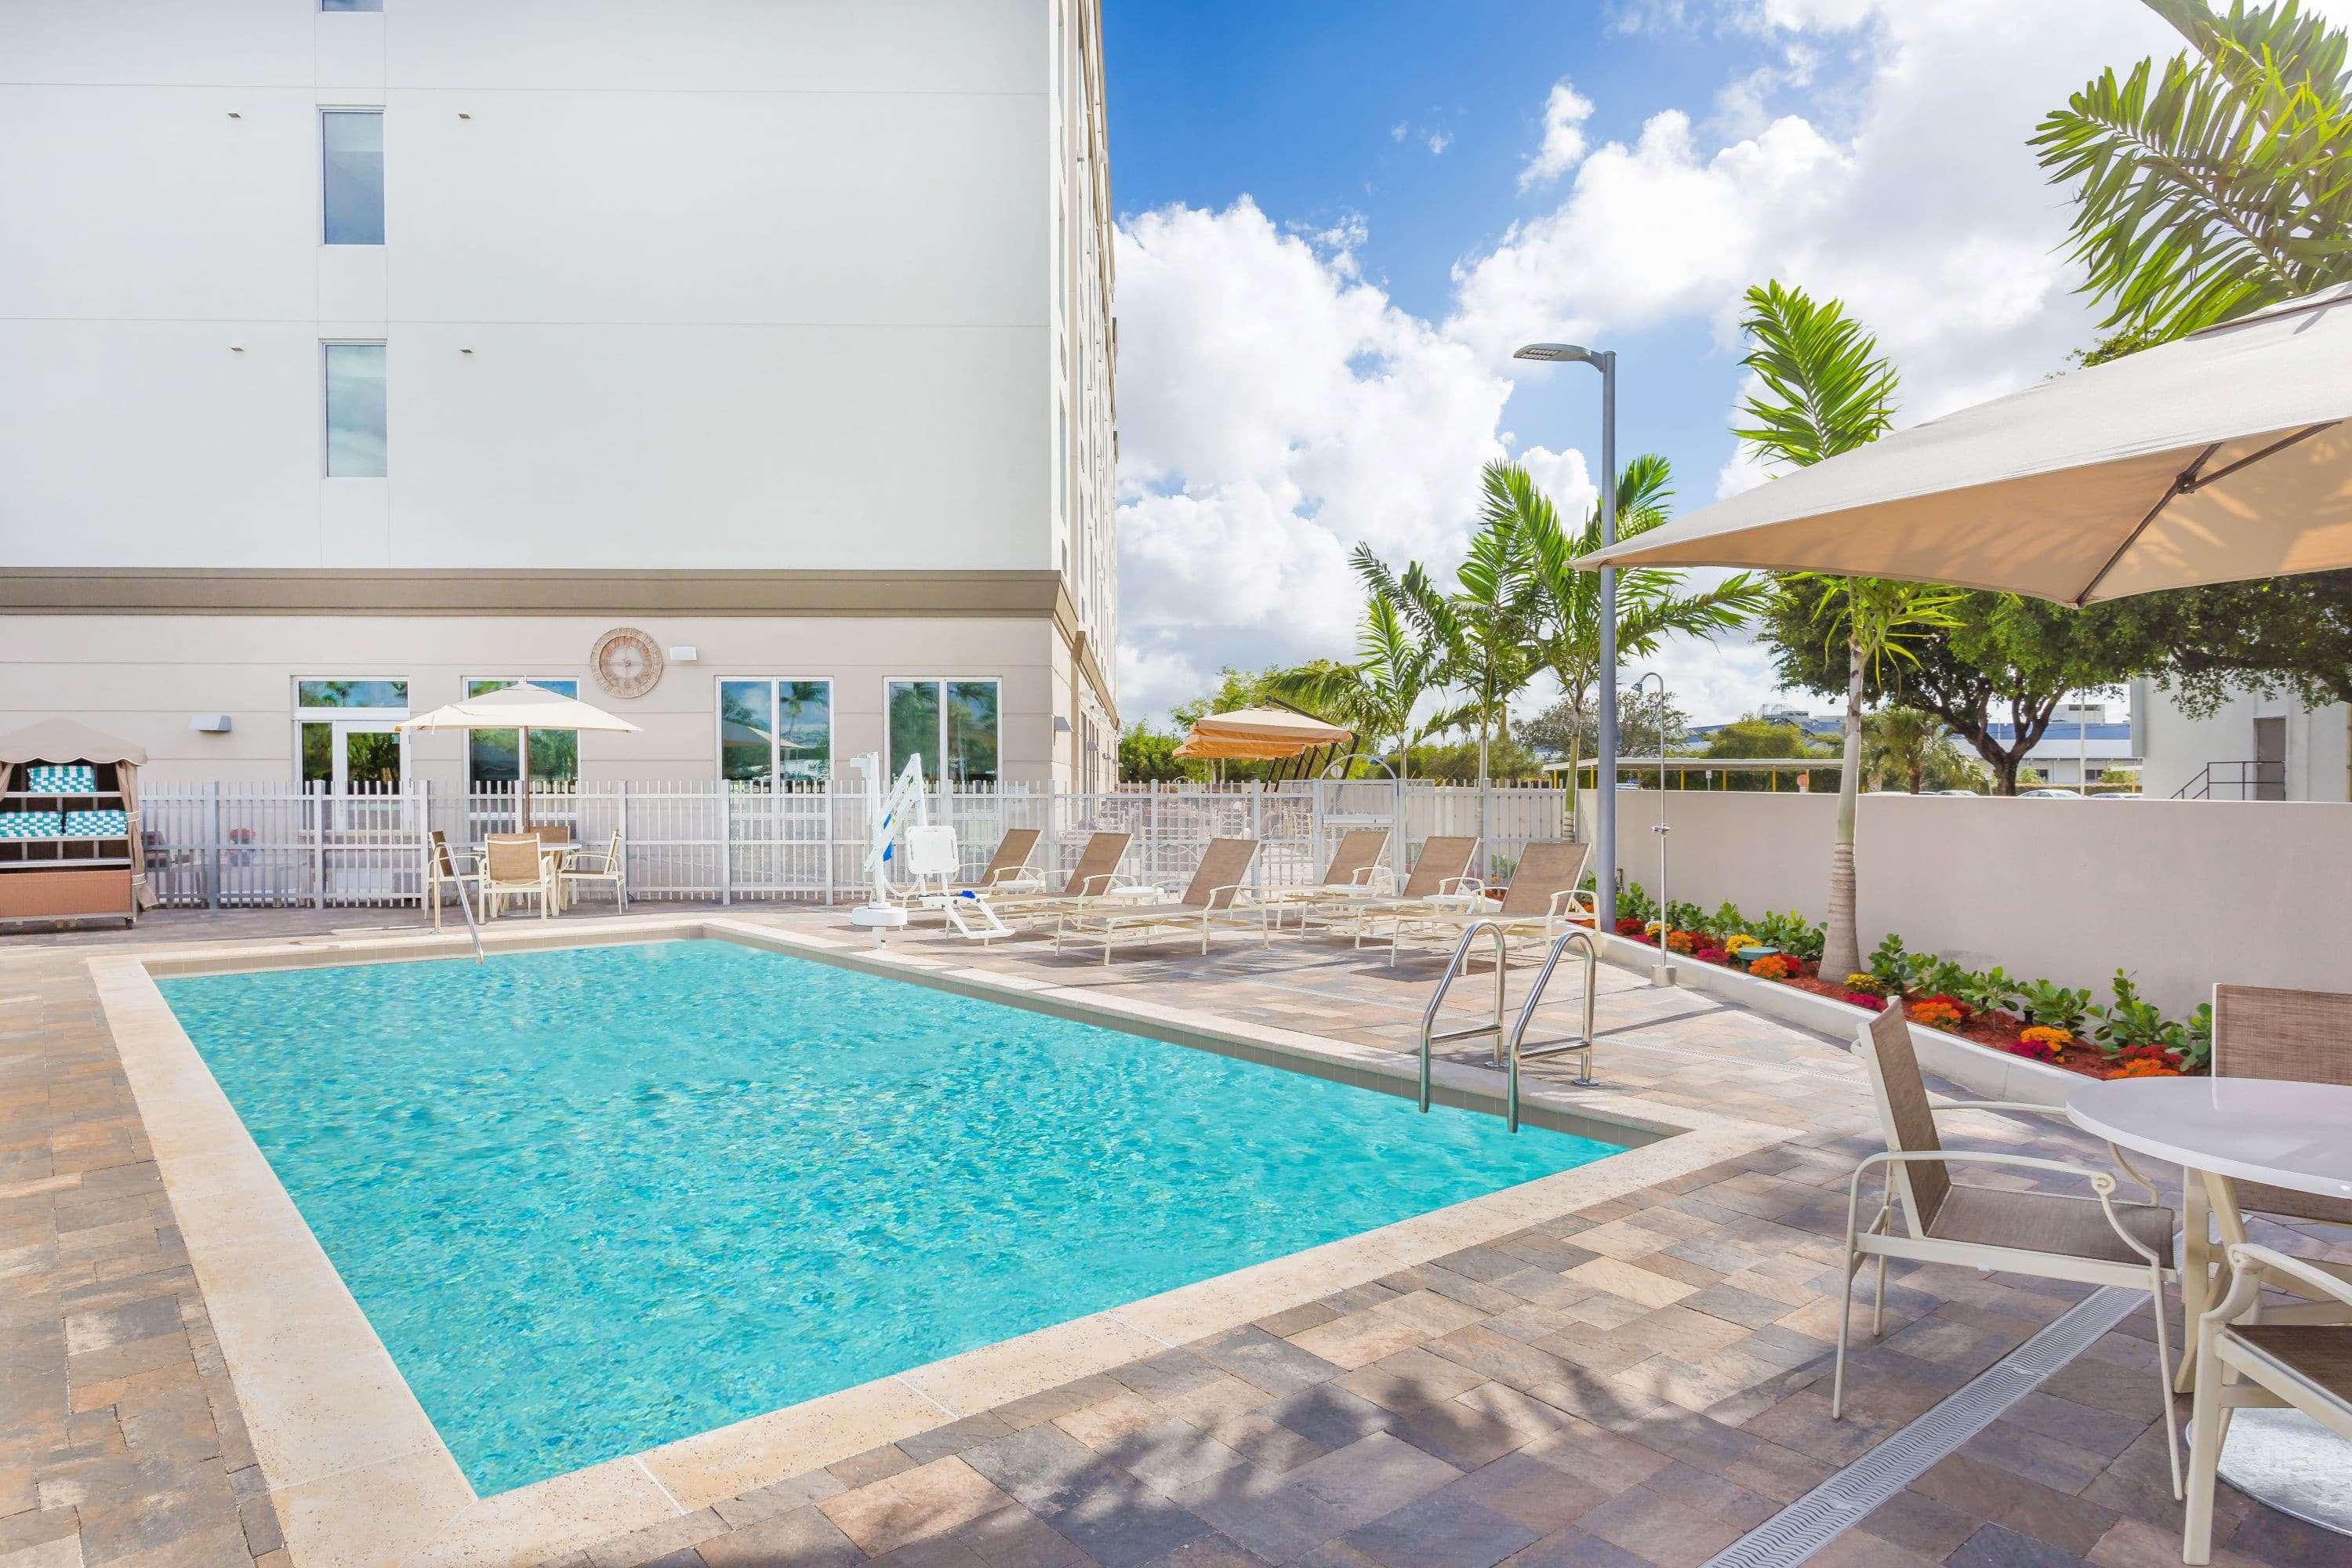 Wingate By Wyndham Miami Airport Hotel Exterior photo